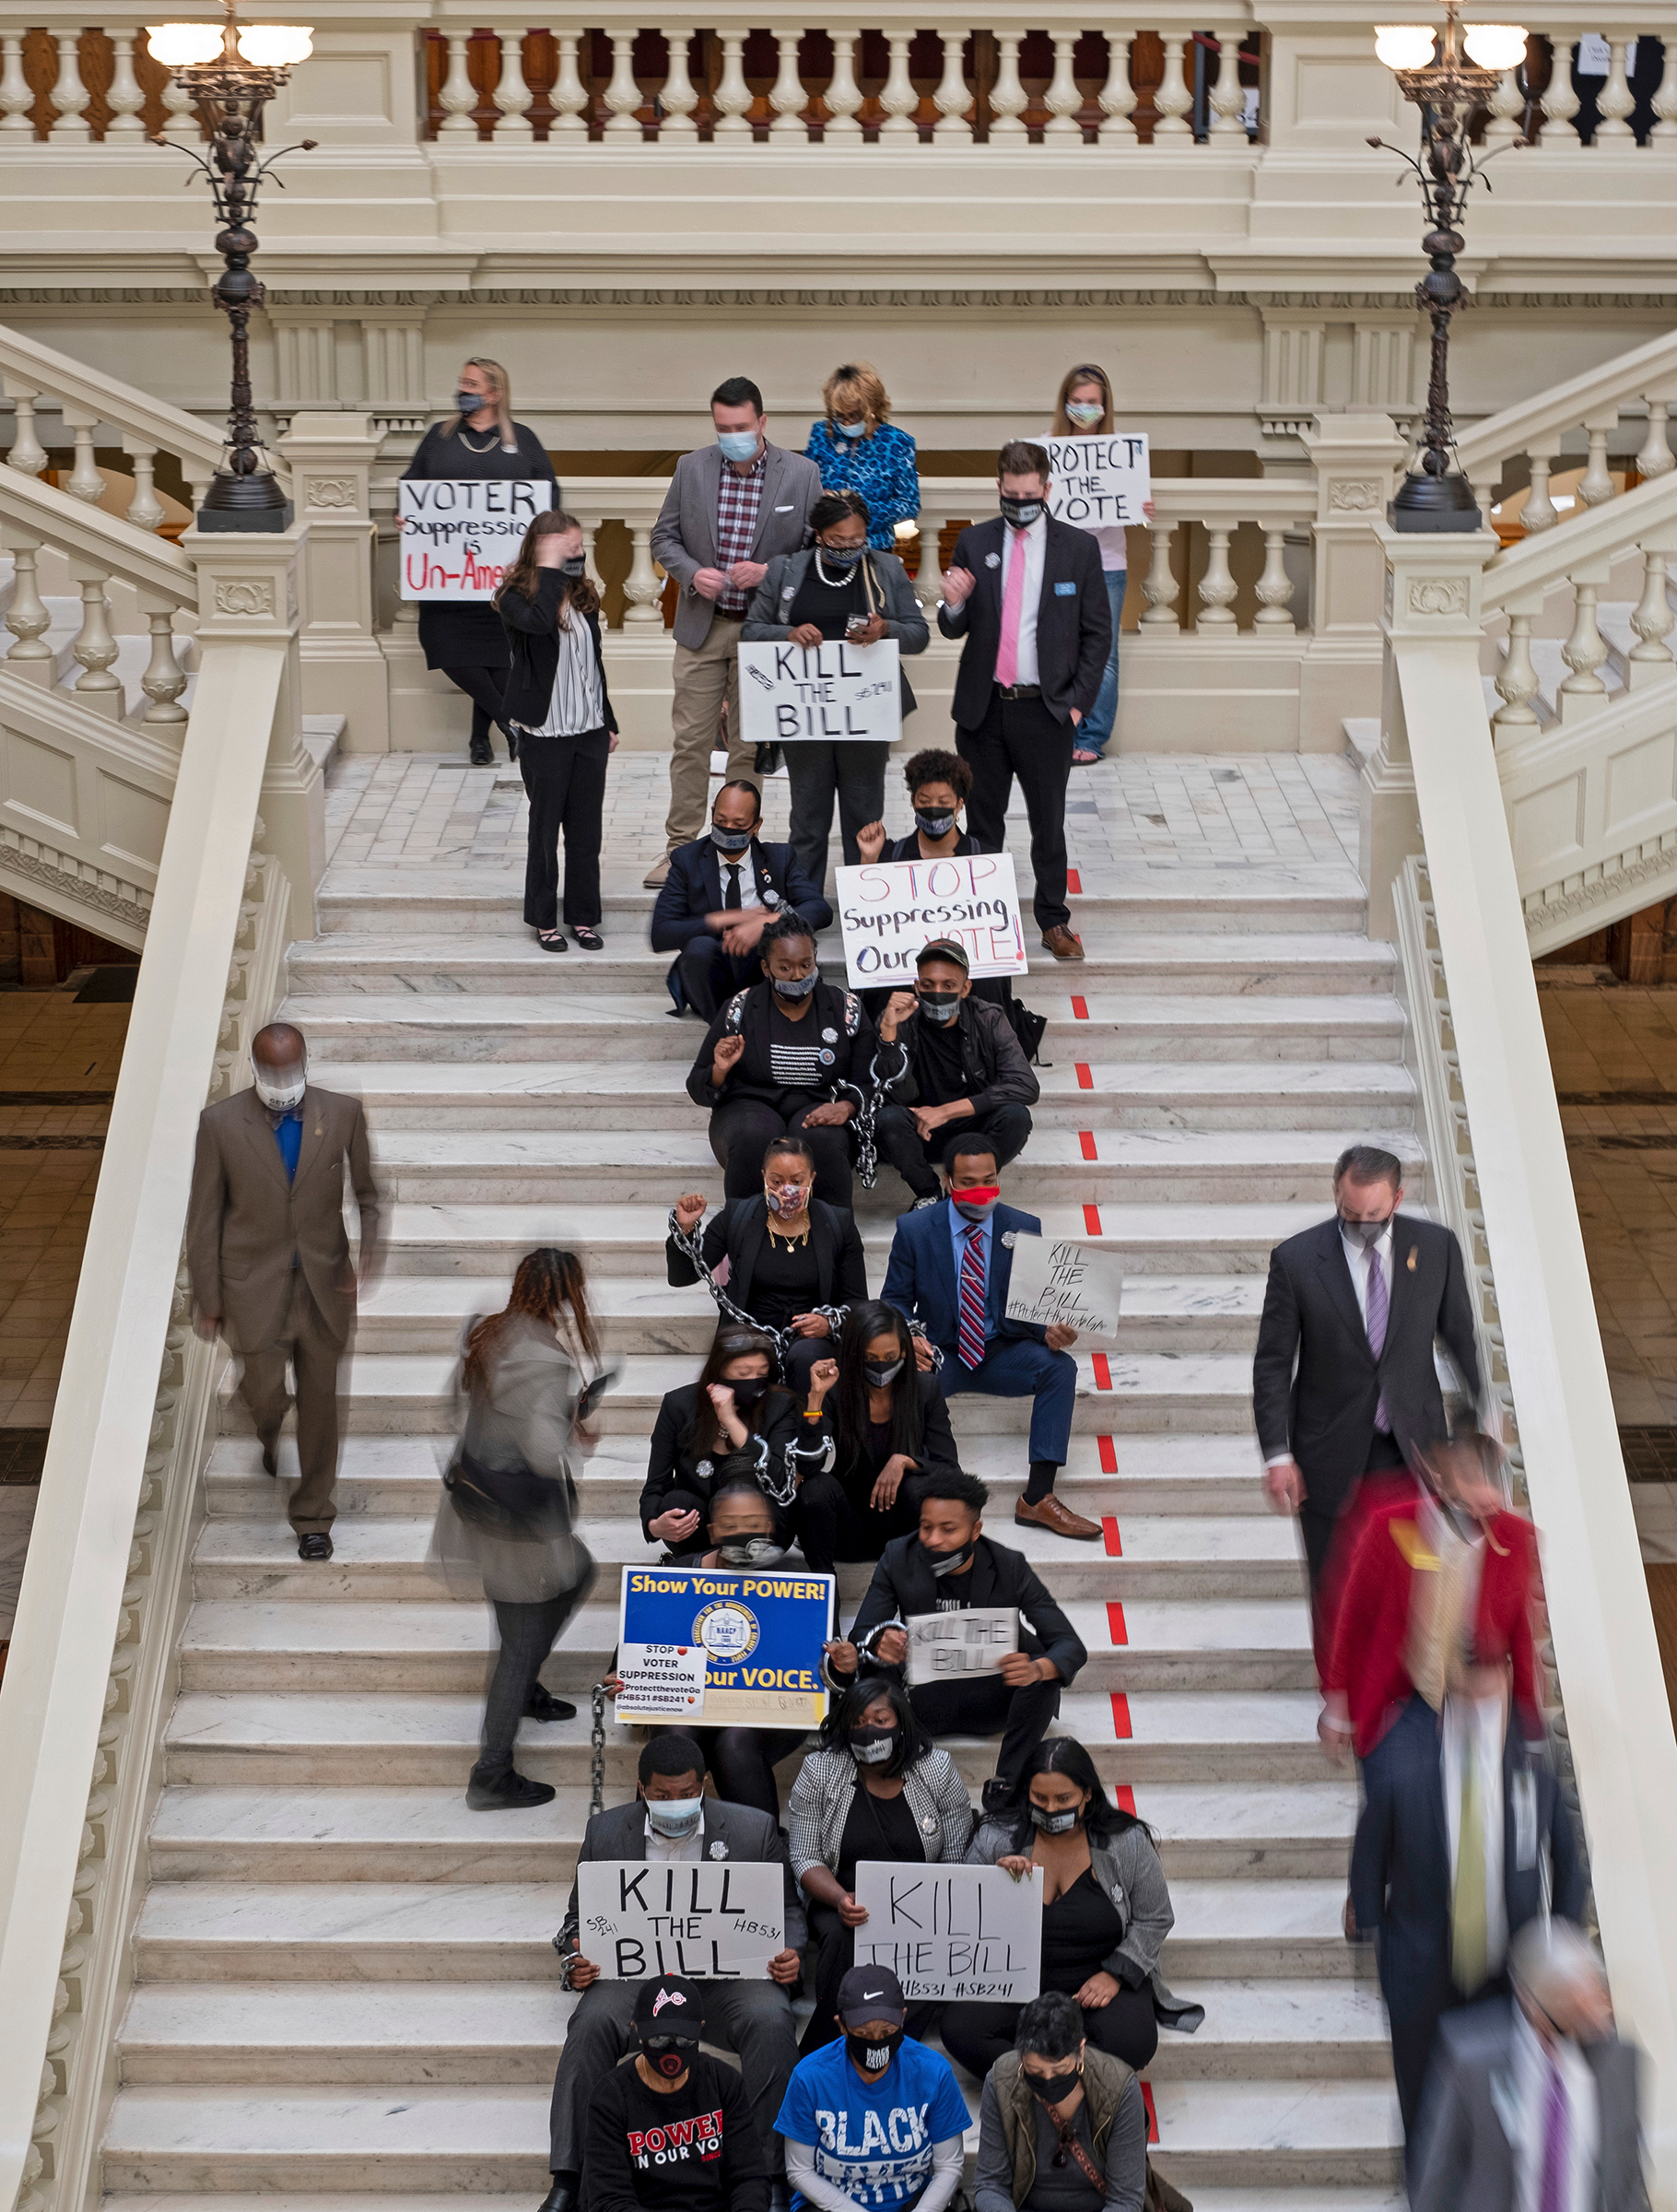 Protesters opposed to changes in Georgia's voting laws sit on the steps inside the State Capitol in Atlanta, Ga., as the Legislature breaks for lunch Monday, March 8, 2021, in Atlanta. (Ben Gray—AP)